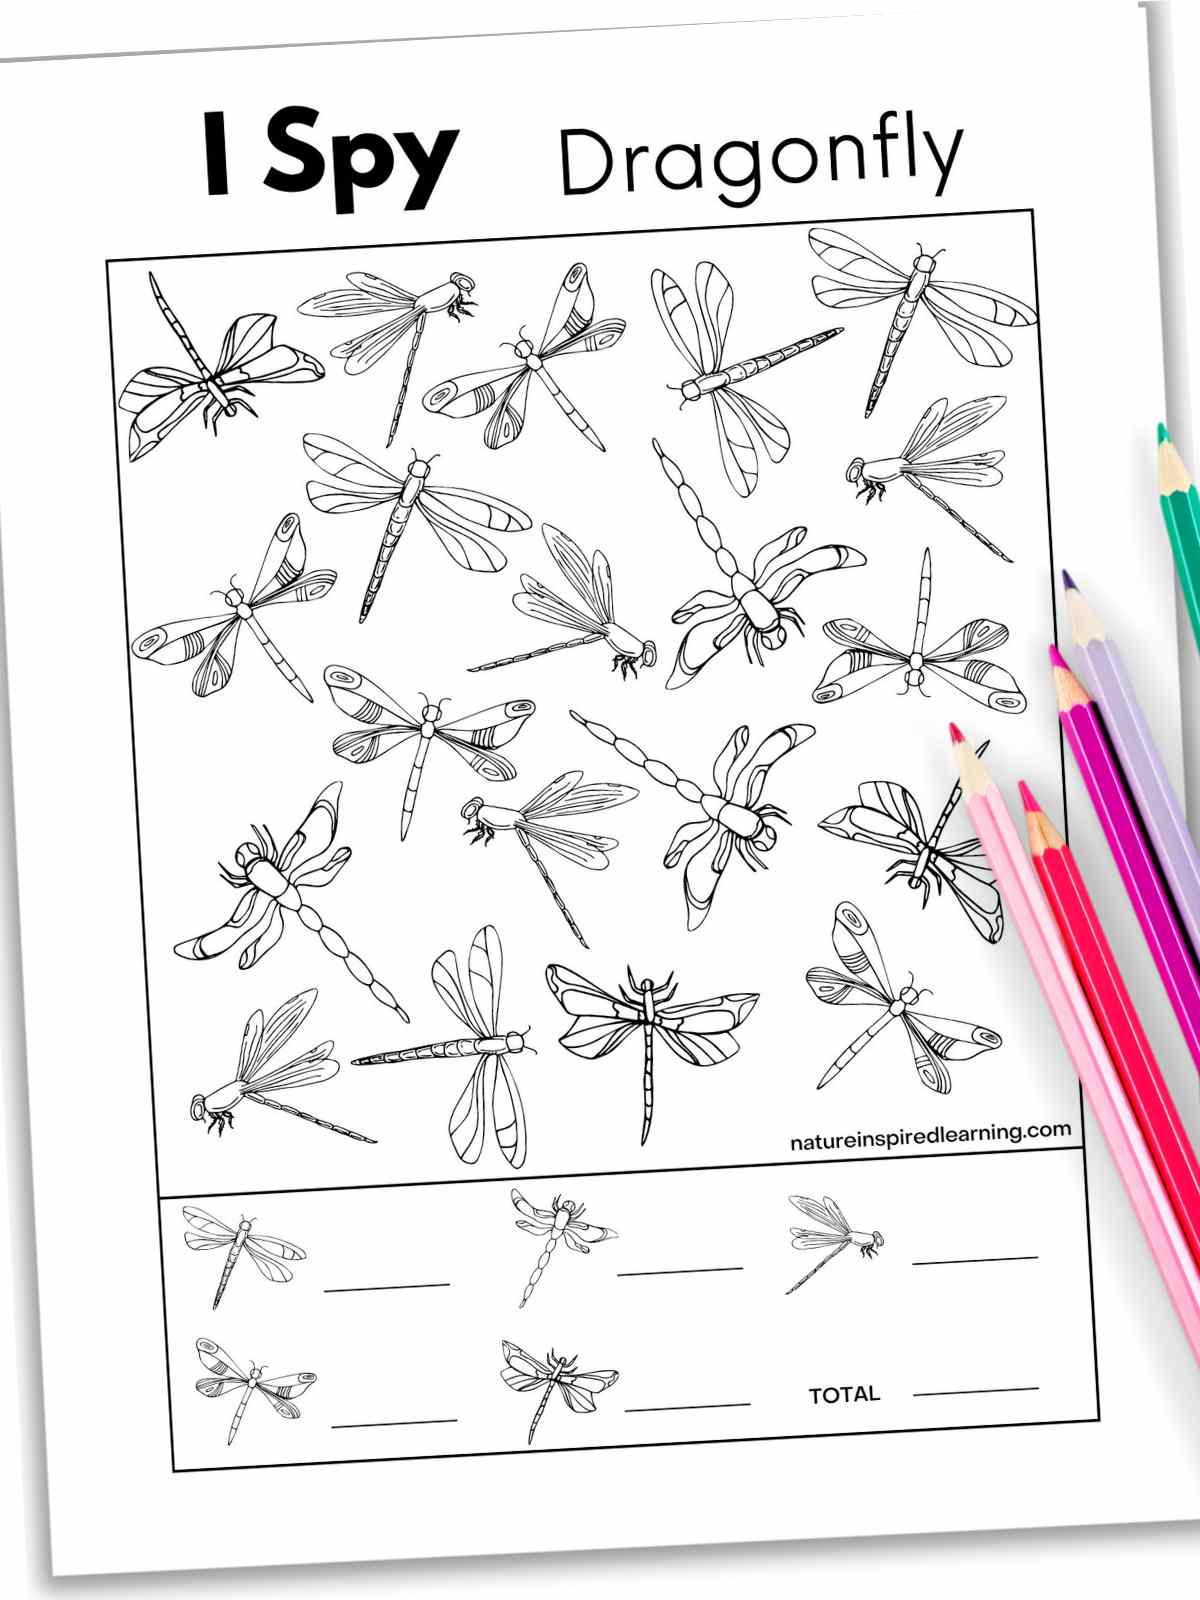 Black and white i spy worksheet with different dragonfly designs with colored pencils bottom right.